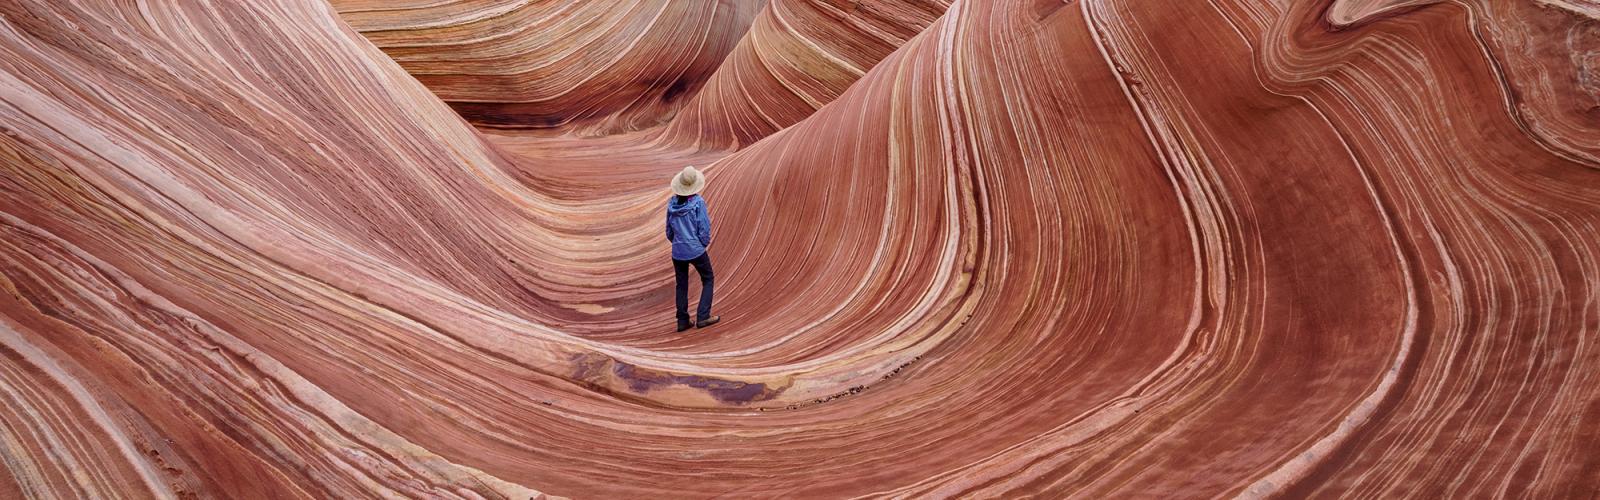 The Wave, rock formation in Coyote Buttes North Arizona USA